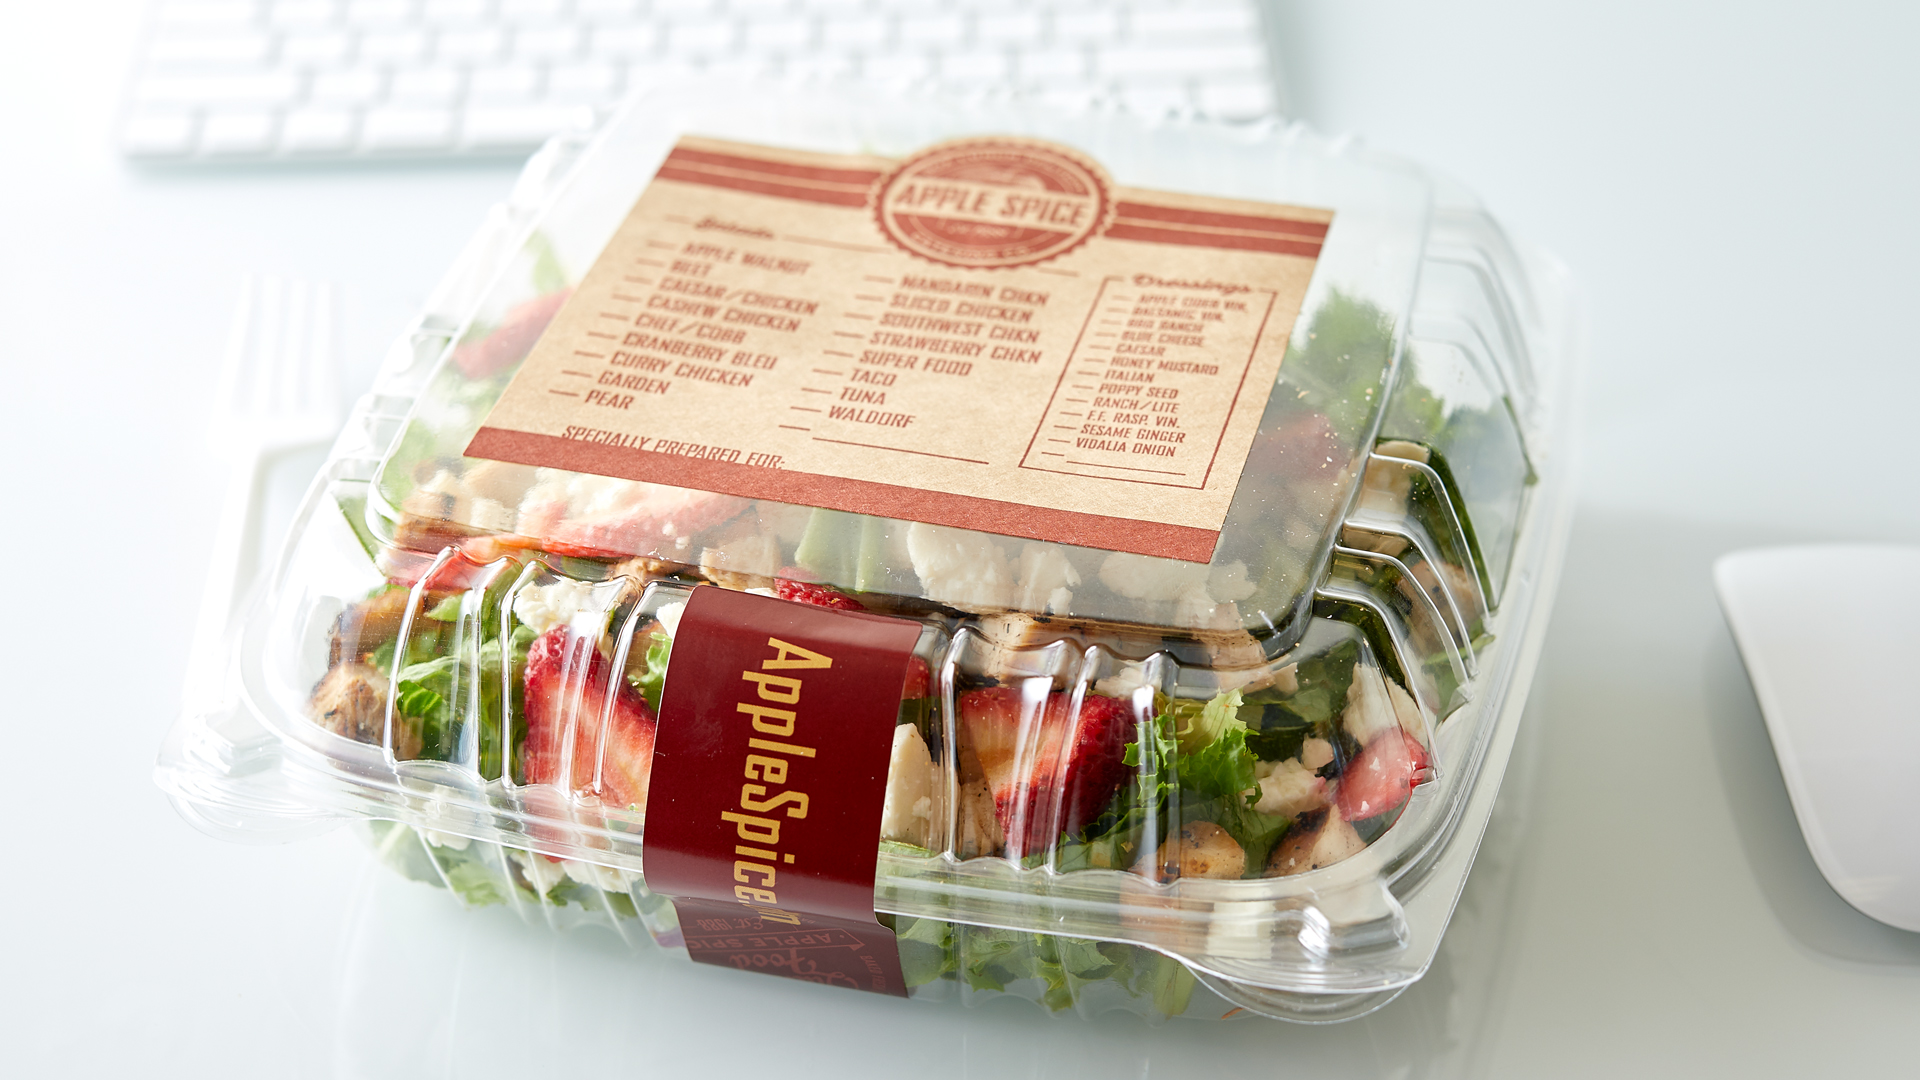 Apple Spice Individually Packaged Salad for Catered Office Events